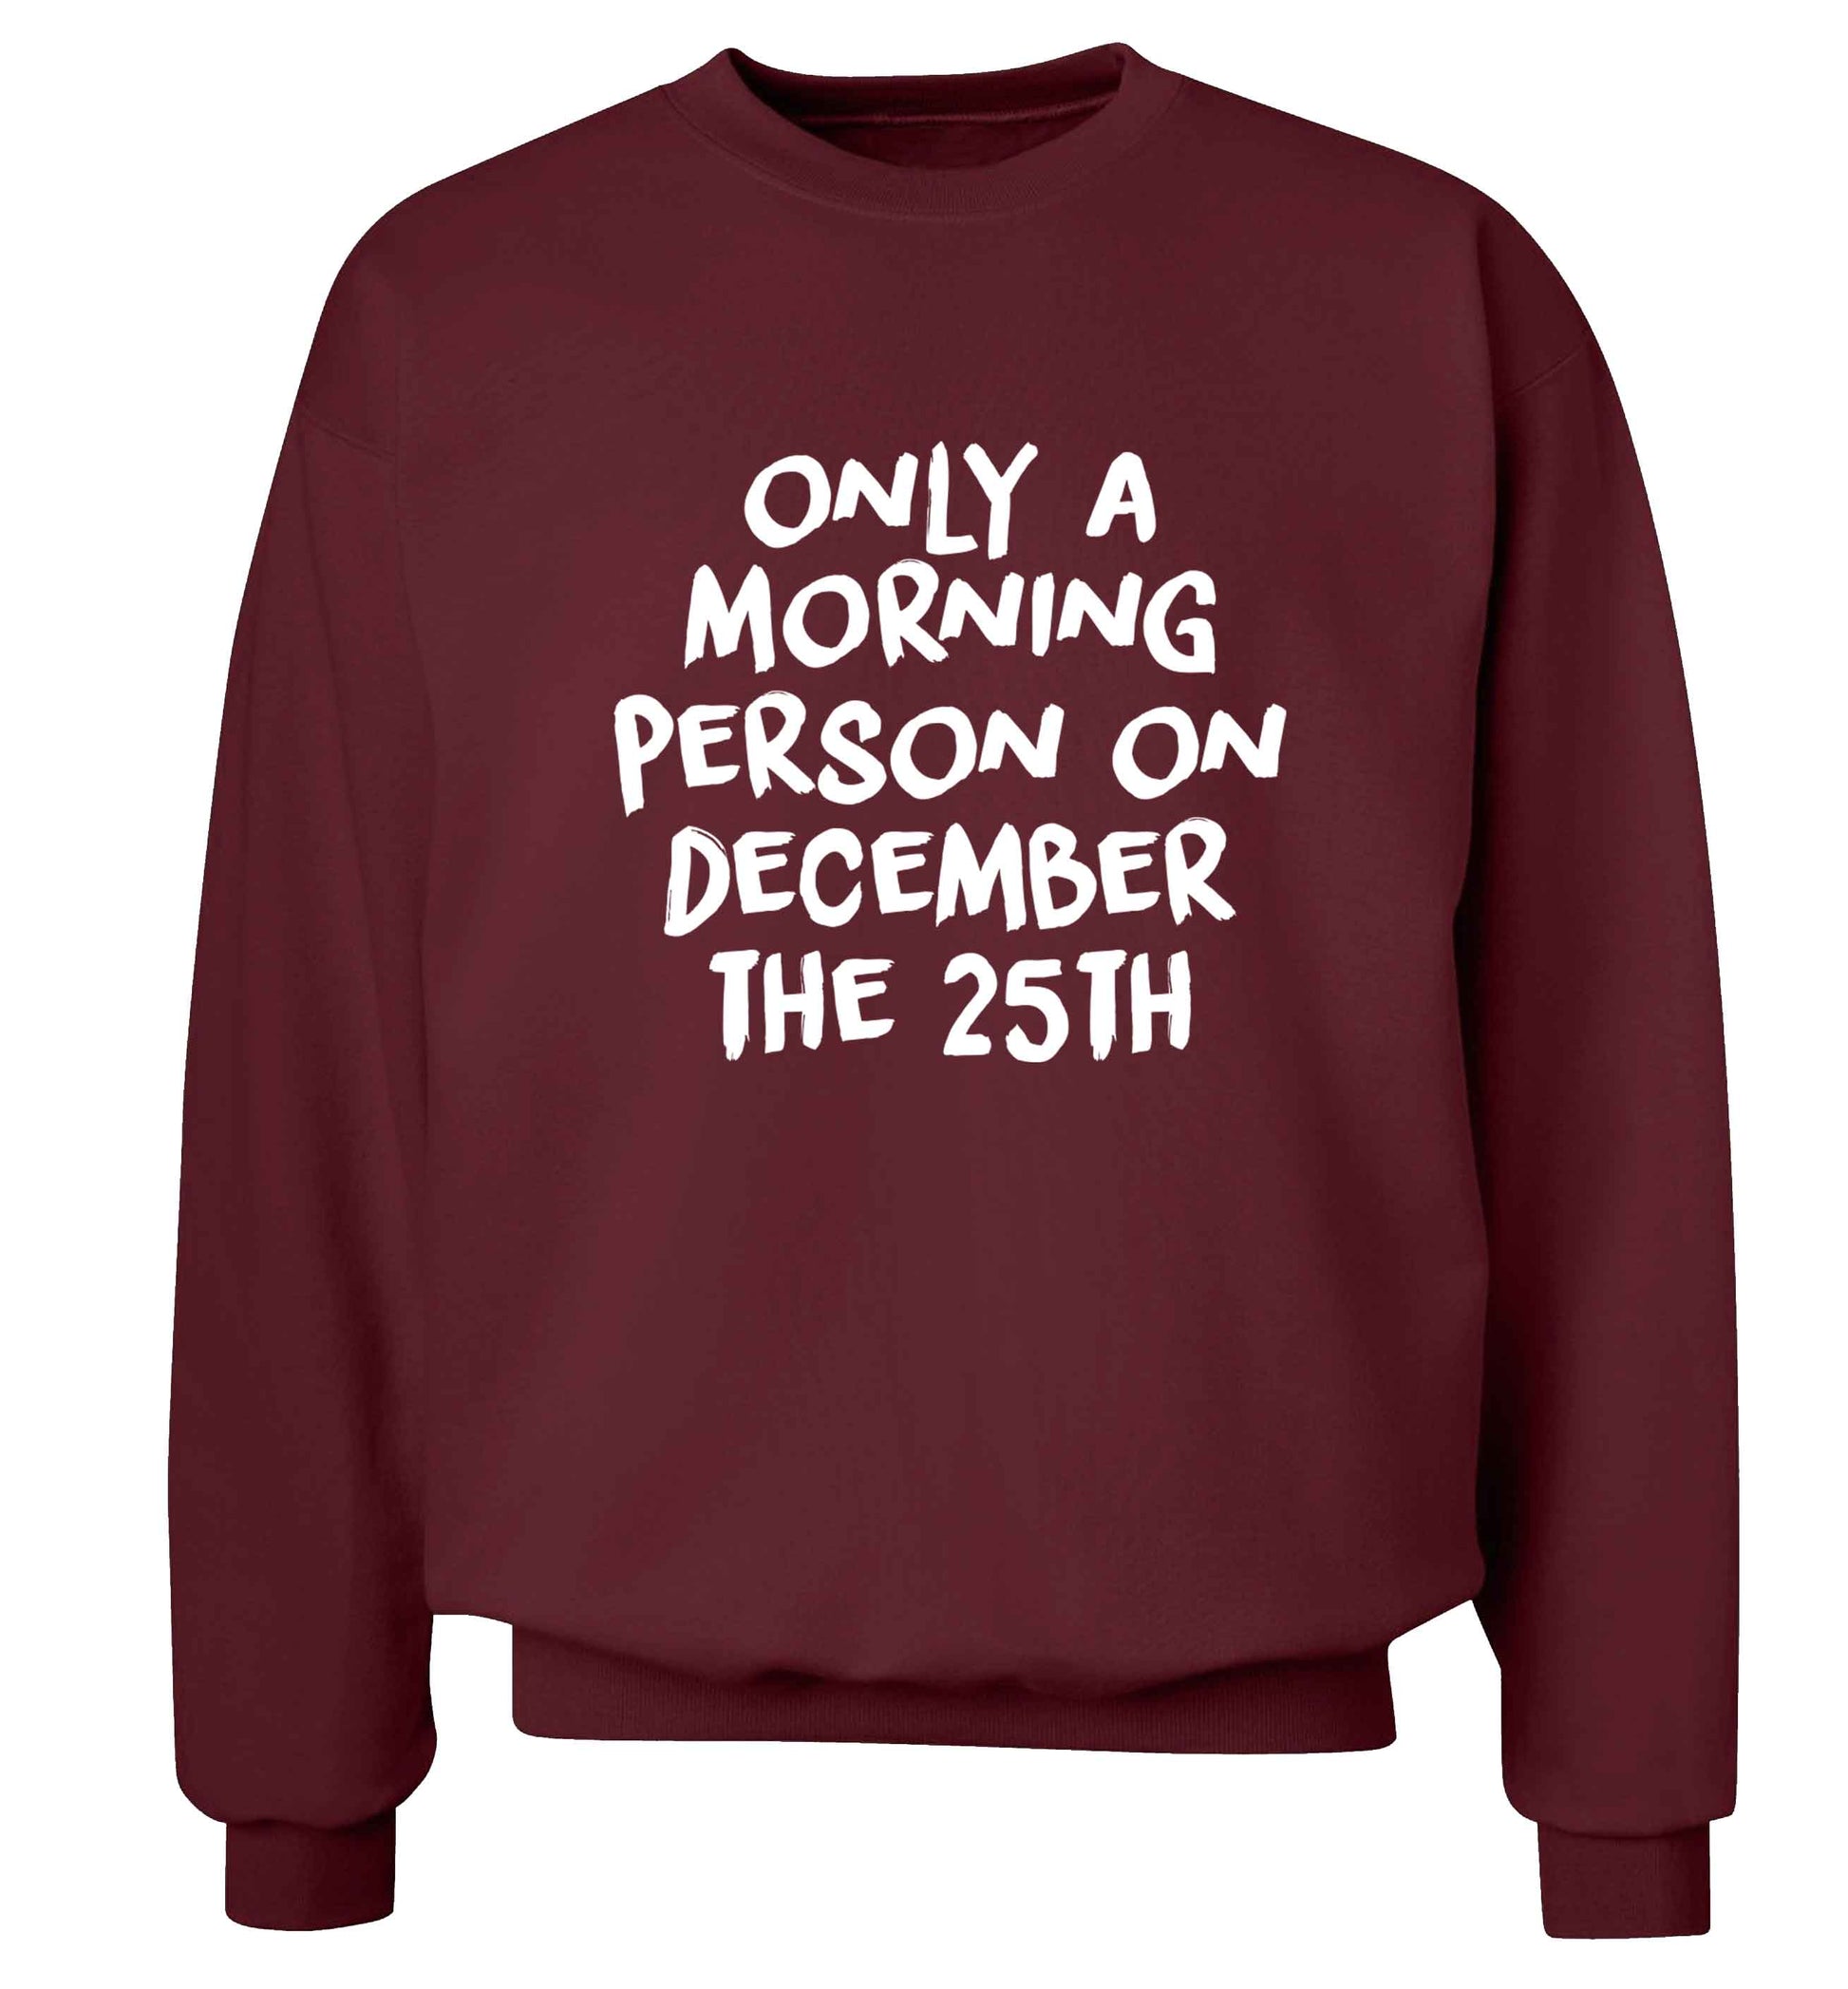 I'm only a morning person on December the 25th adult's unisex maroon sweater 2XL